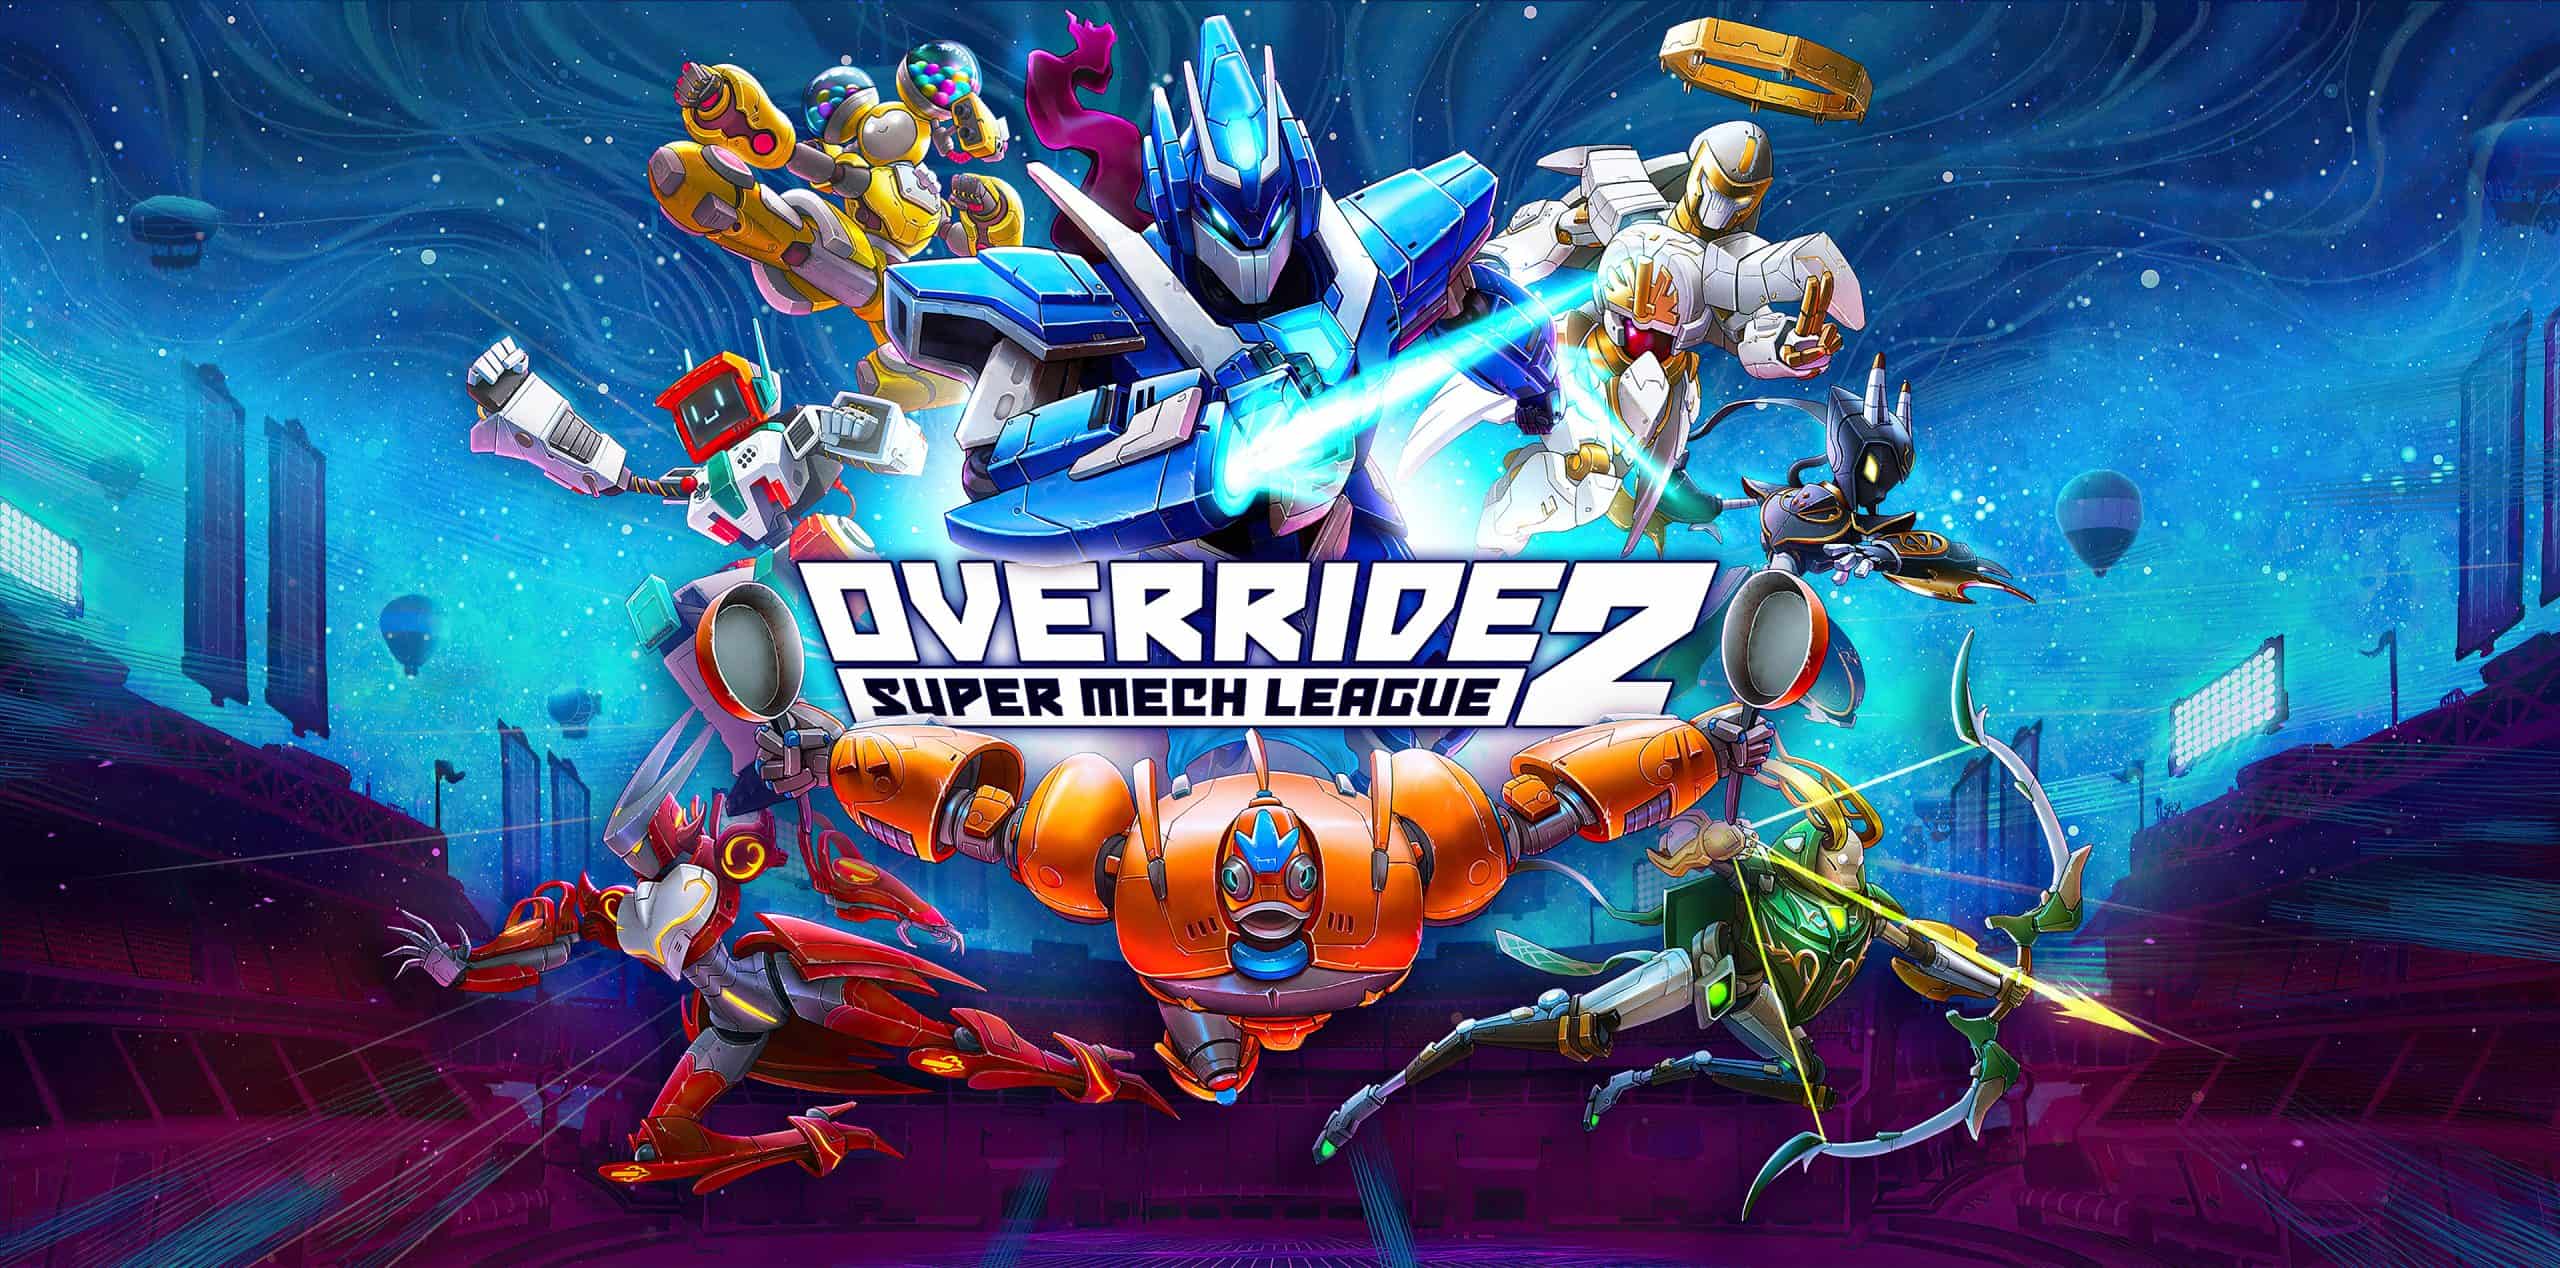 override 2 super mech league all characters amazon mechs beta black king bemular crossplay coop ultraman deluxe edition release date switch gameplay pc trophy guide + ign local multiplayer nintendo offline co-op ps5 ps4 review playstation single player season pass 4 players reddit roster recensione steam split screen sprinkles trailer test wiki wikipedia walkthrough xbox metacritic music